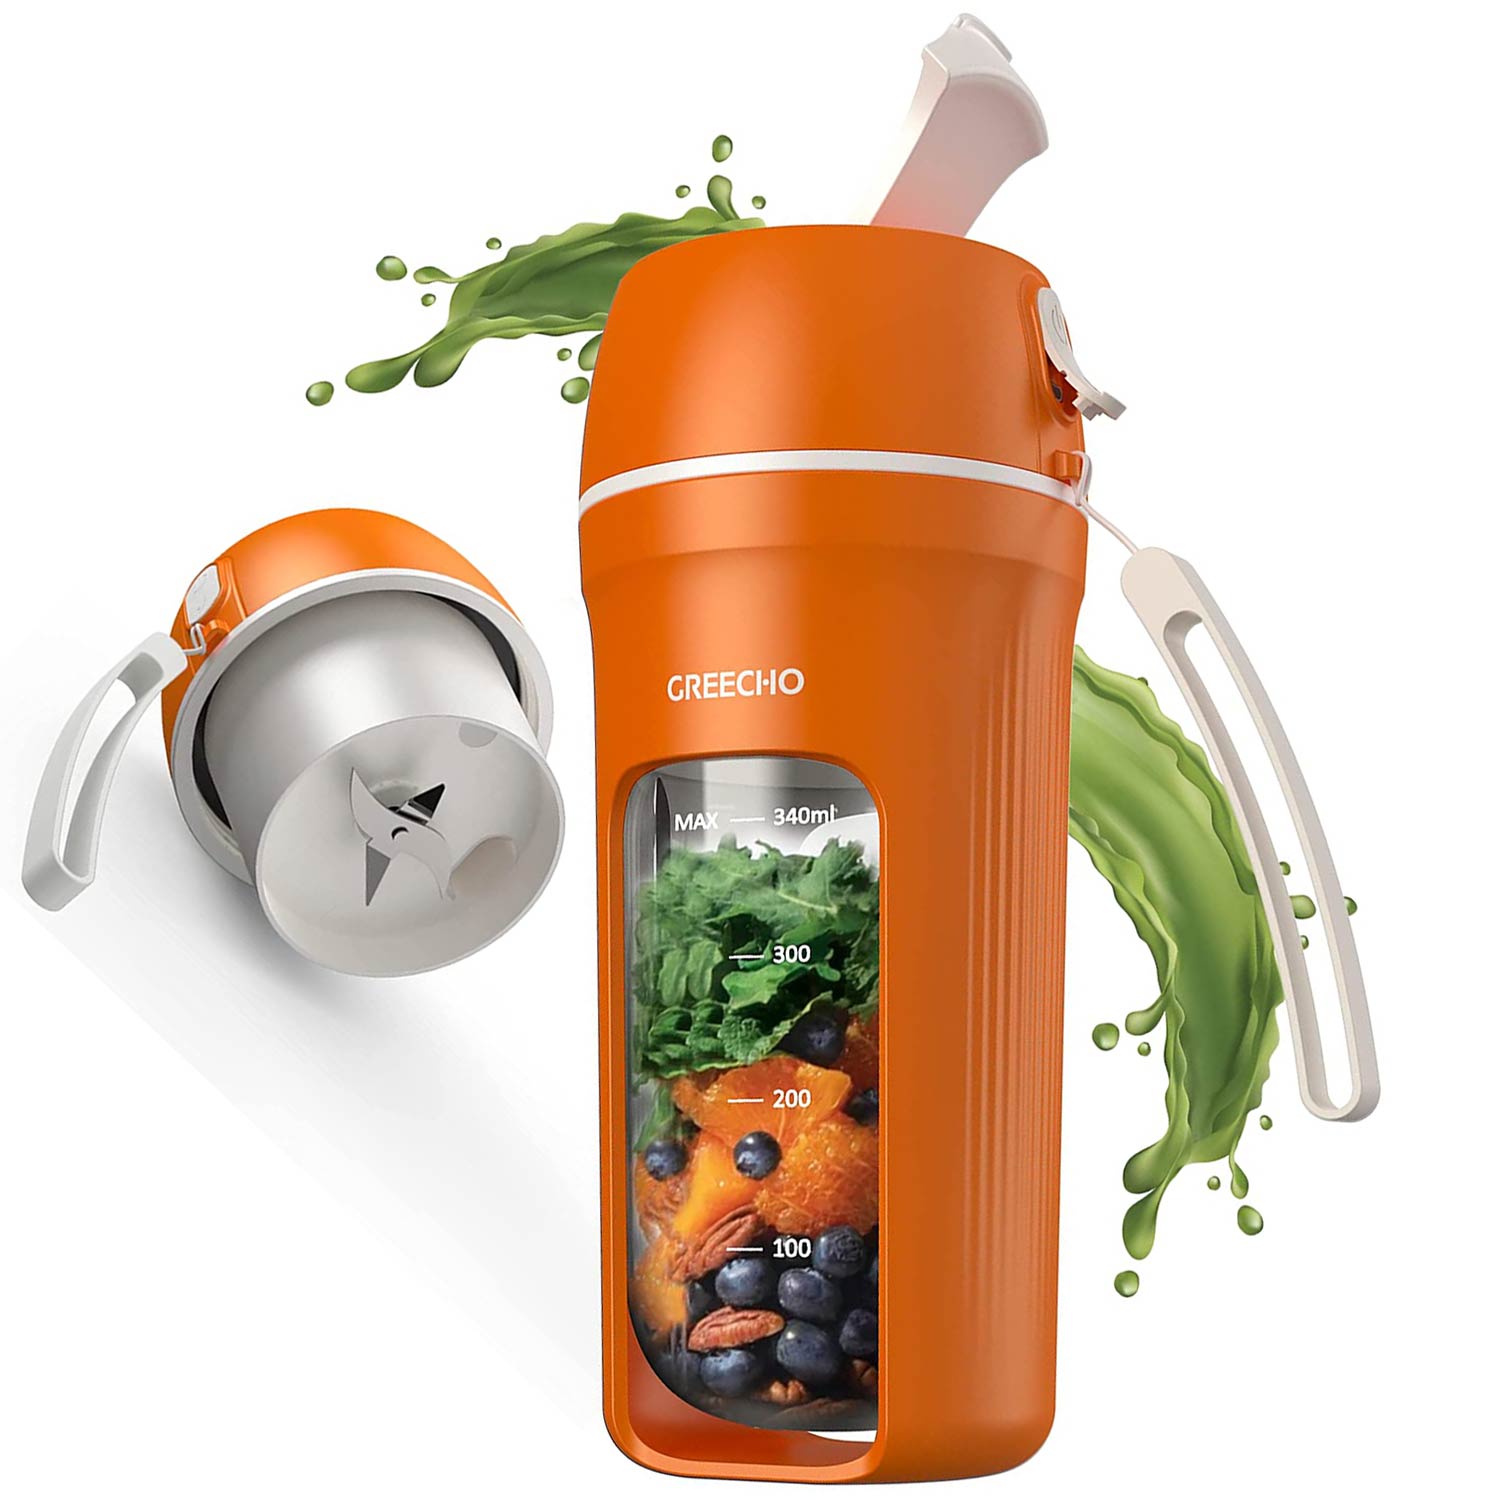 6 Popular Personal Portable Blenders That Make Great Gifts For Those